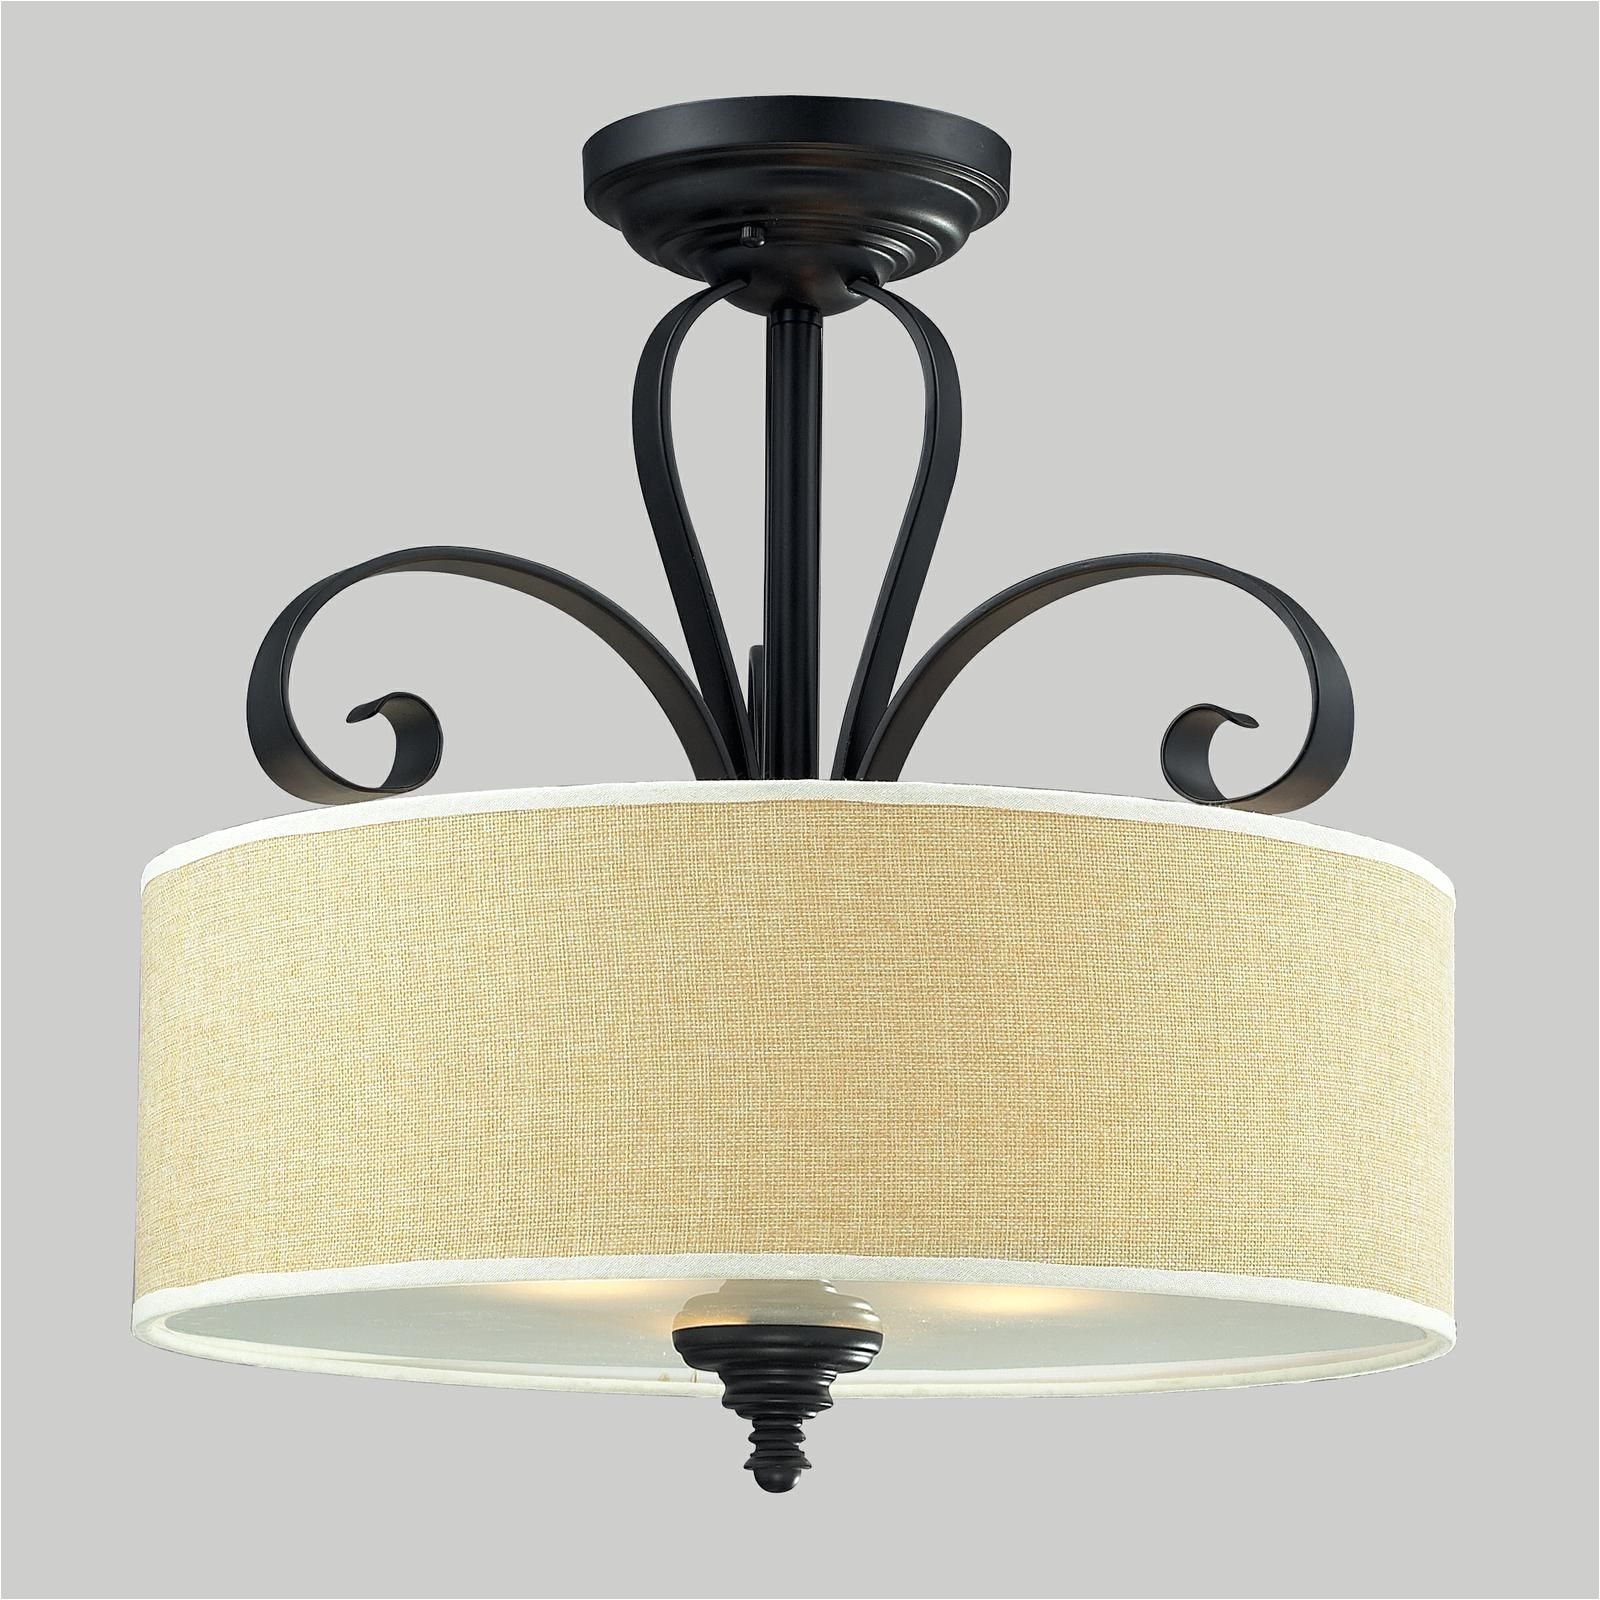 add some southern flare to your home or office space with this elegant 3 light flush mount light fixture from charleston the graceful curves feature a